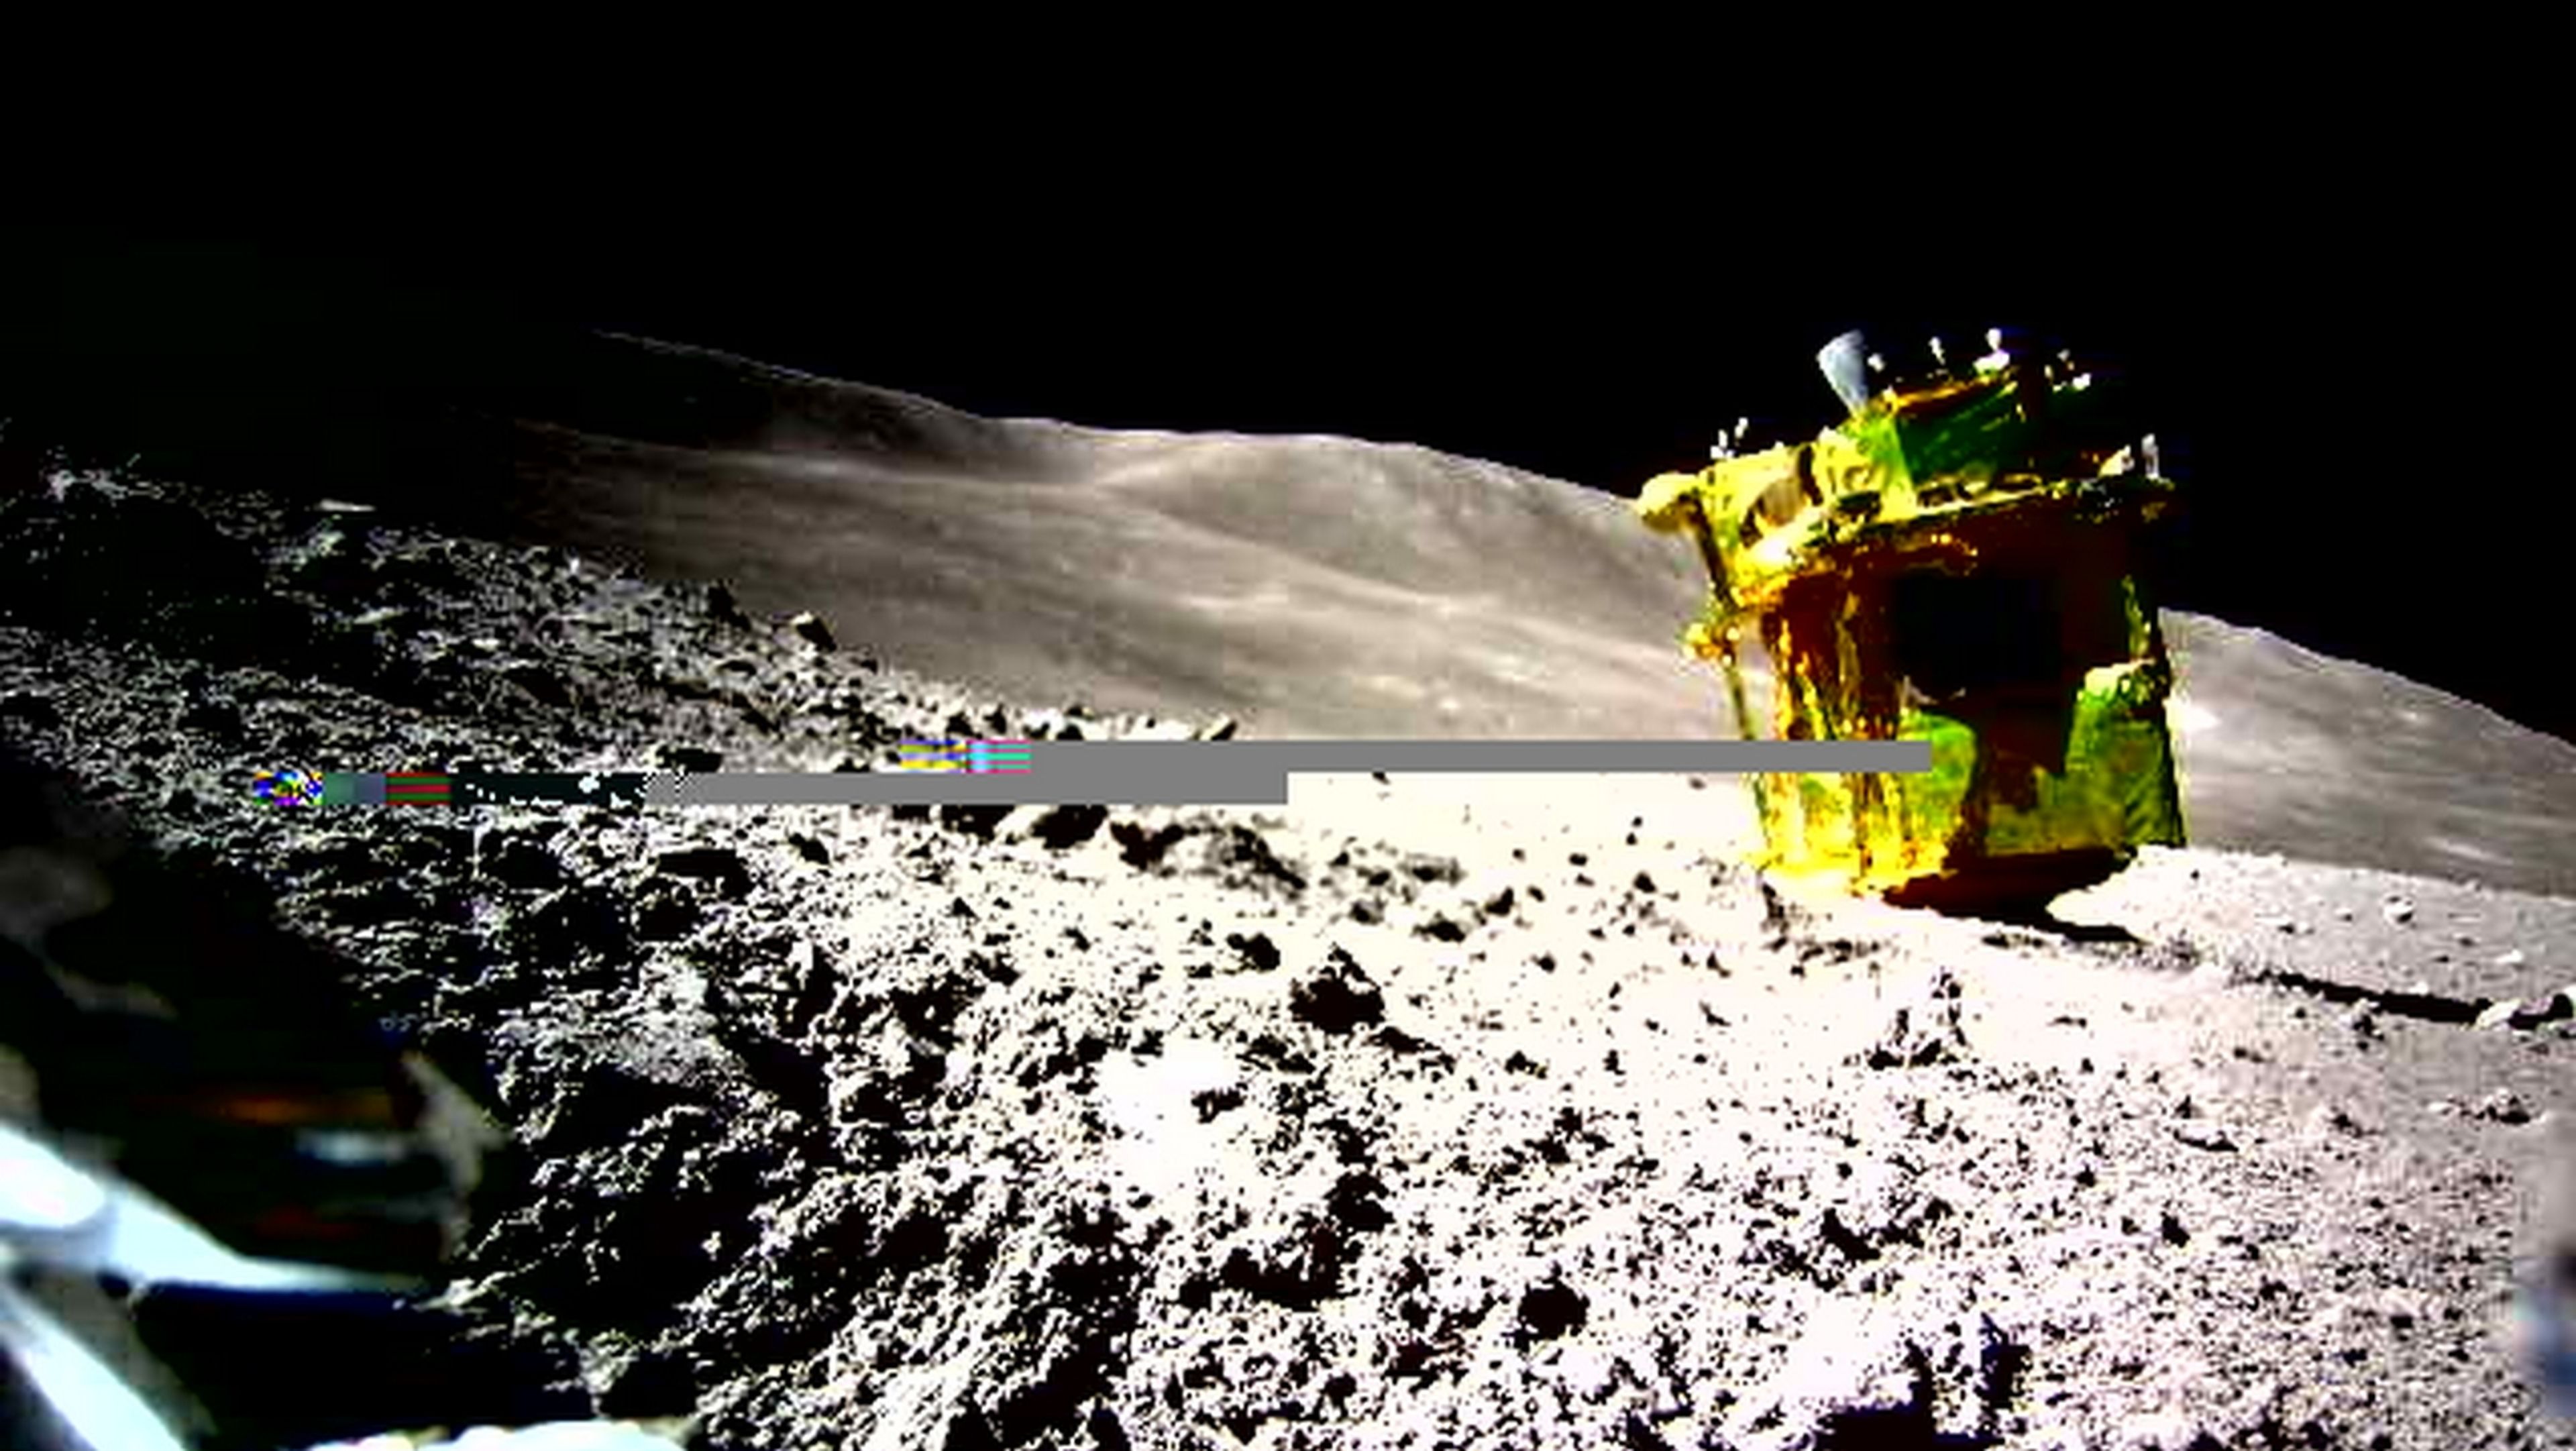 The Japanese SLIM module landed on the Moon upside down: who took the photo?